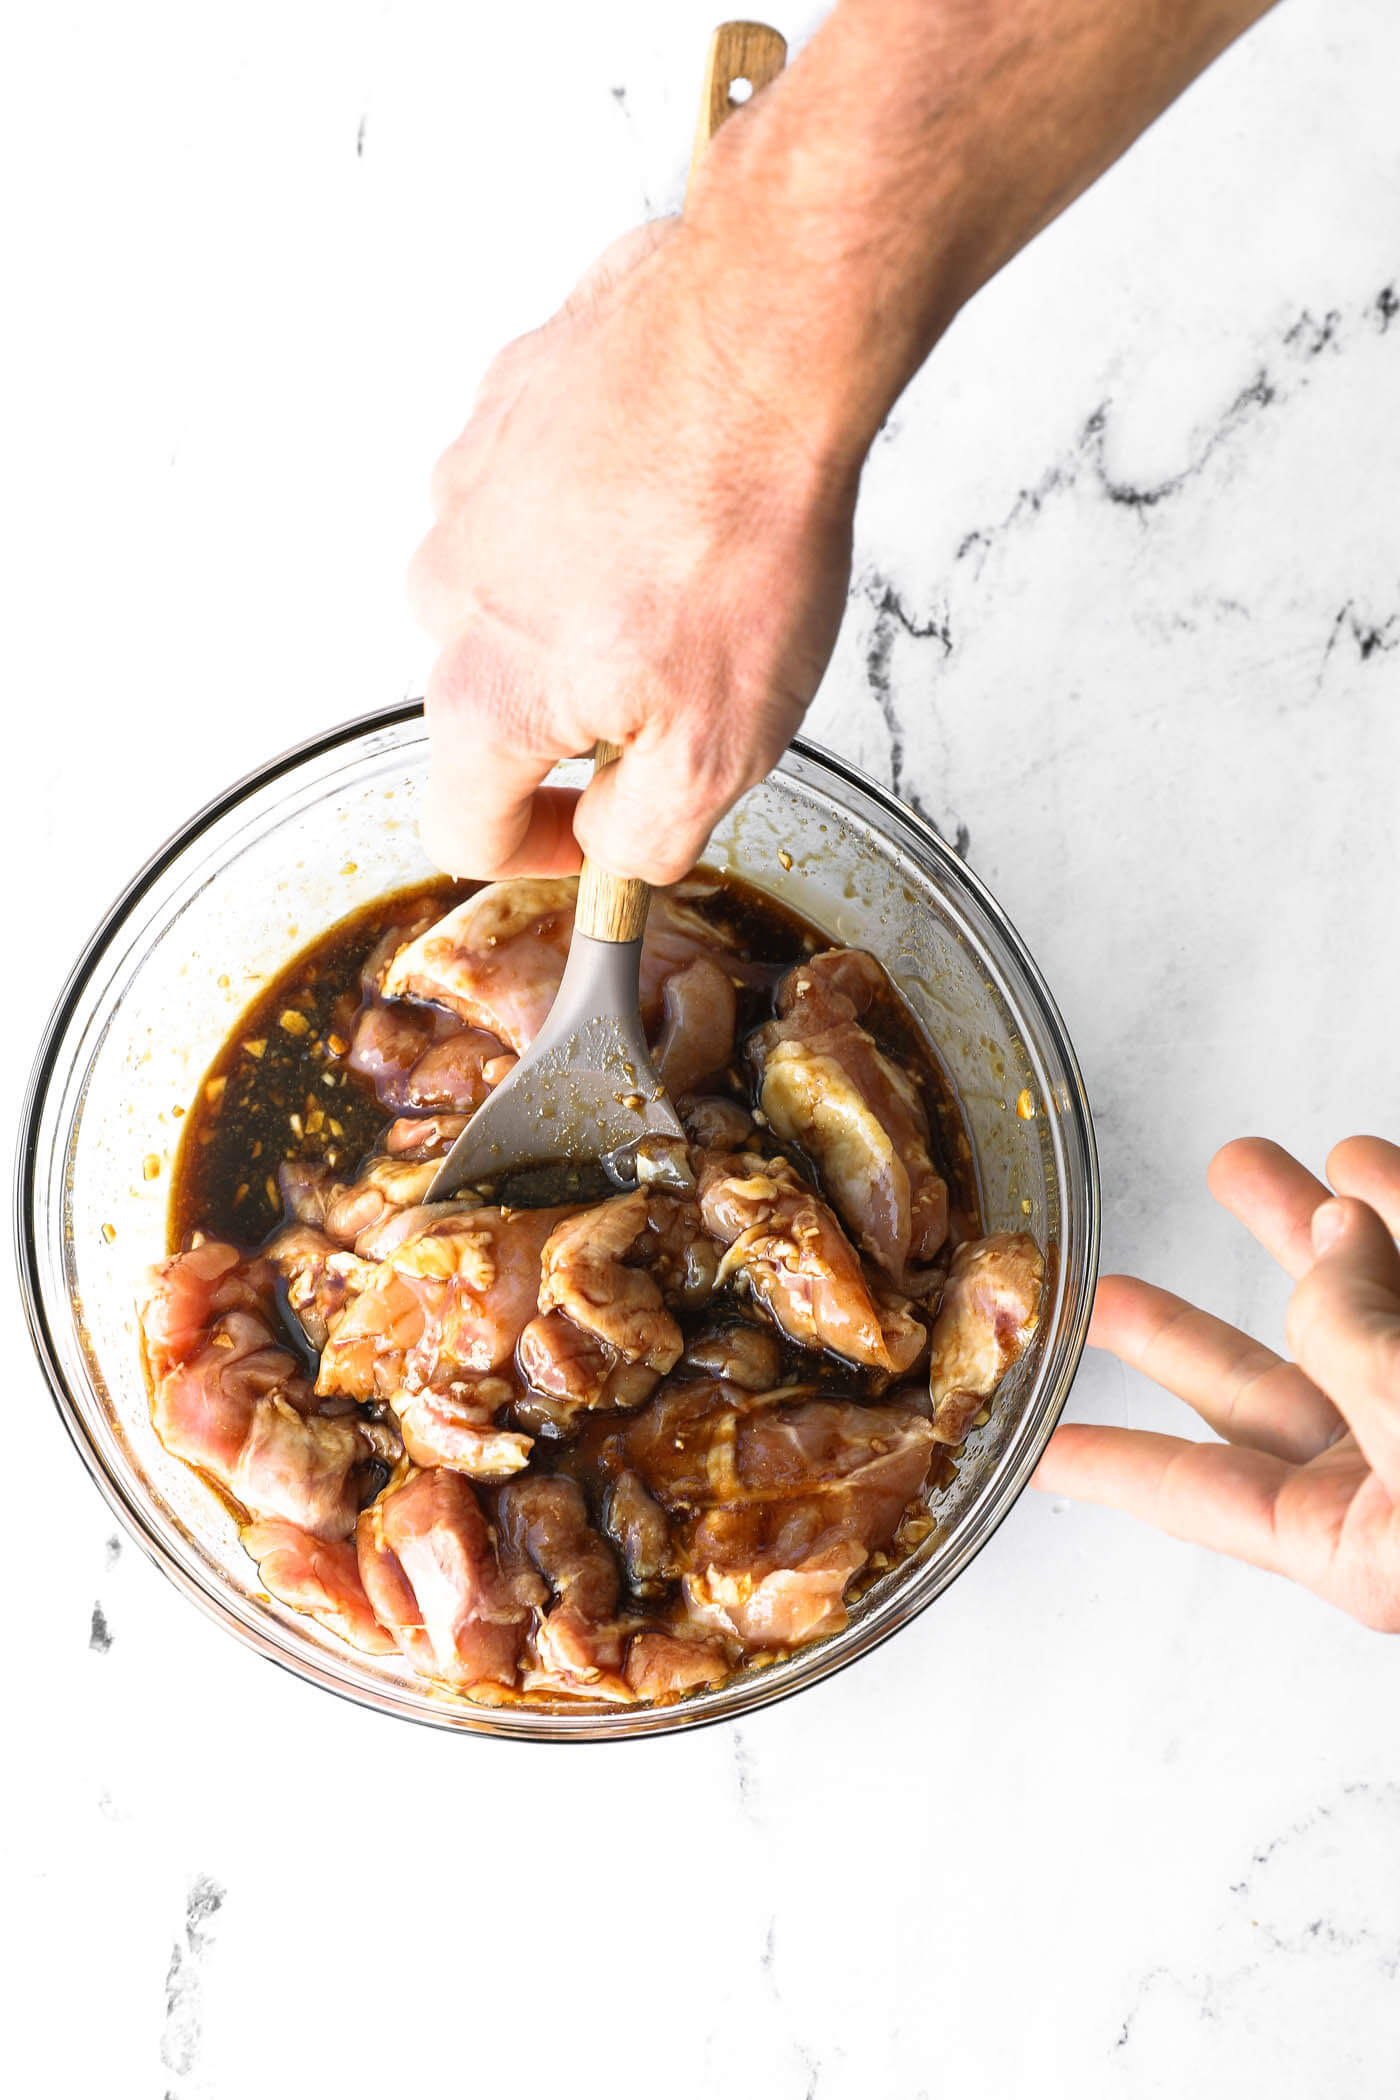 Mixing raw chicken with the honey garlic marinade in a glass bowl.